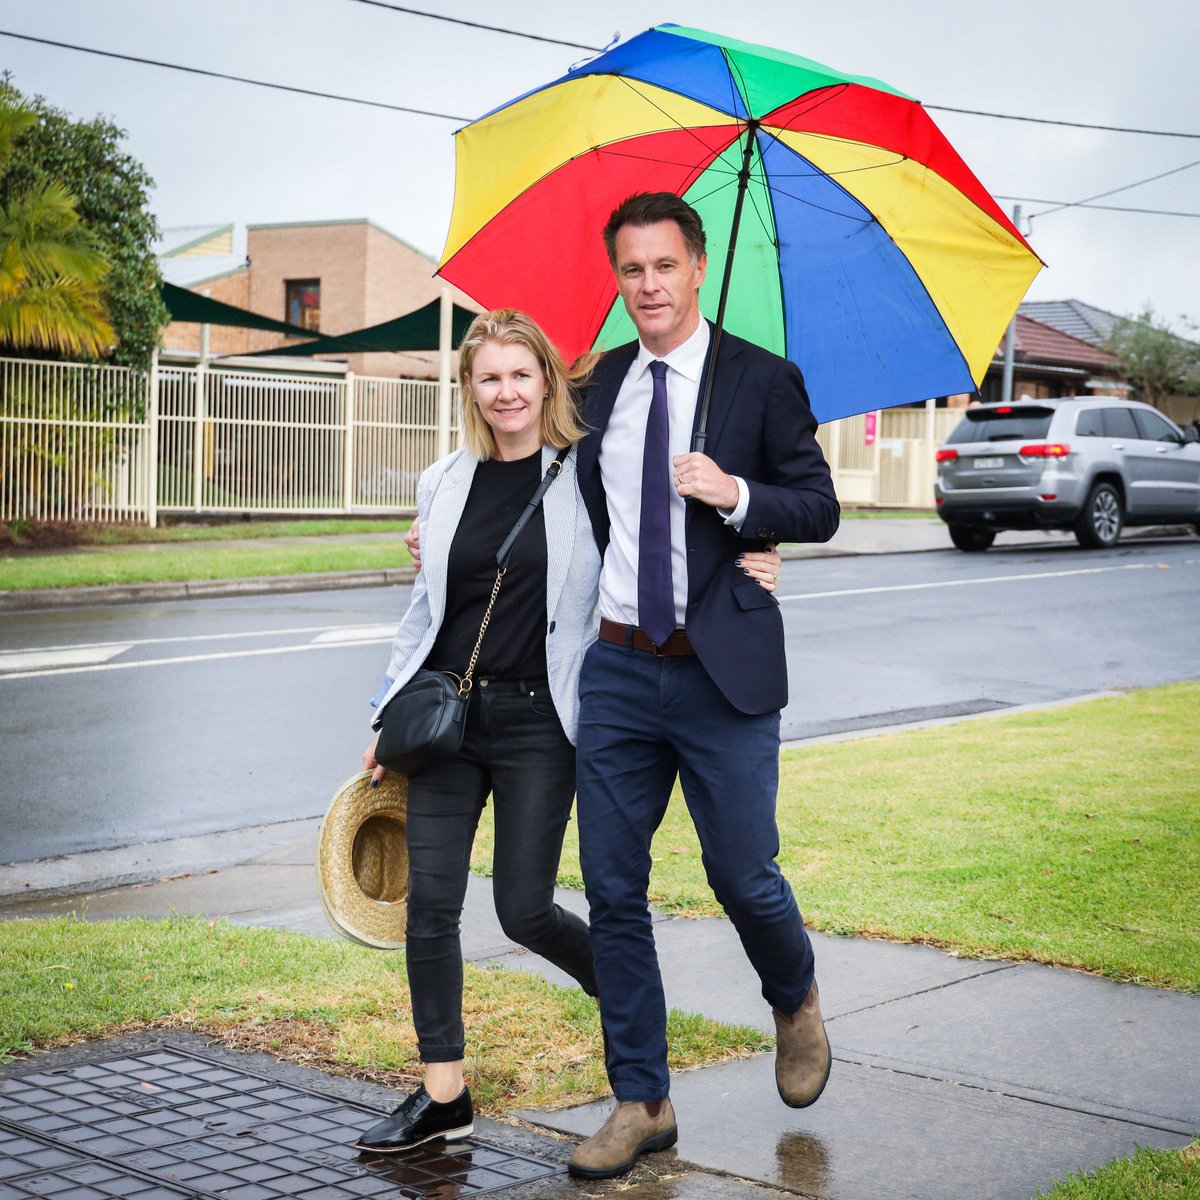 Rain, hail or shine - nothing can stop us on the campaign trail. ...